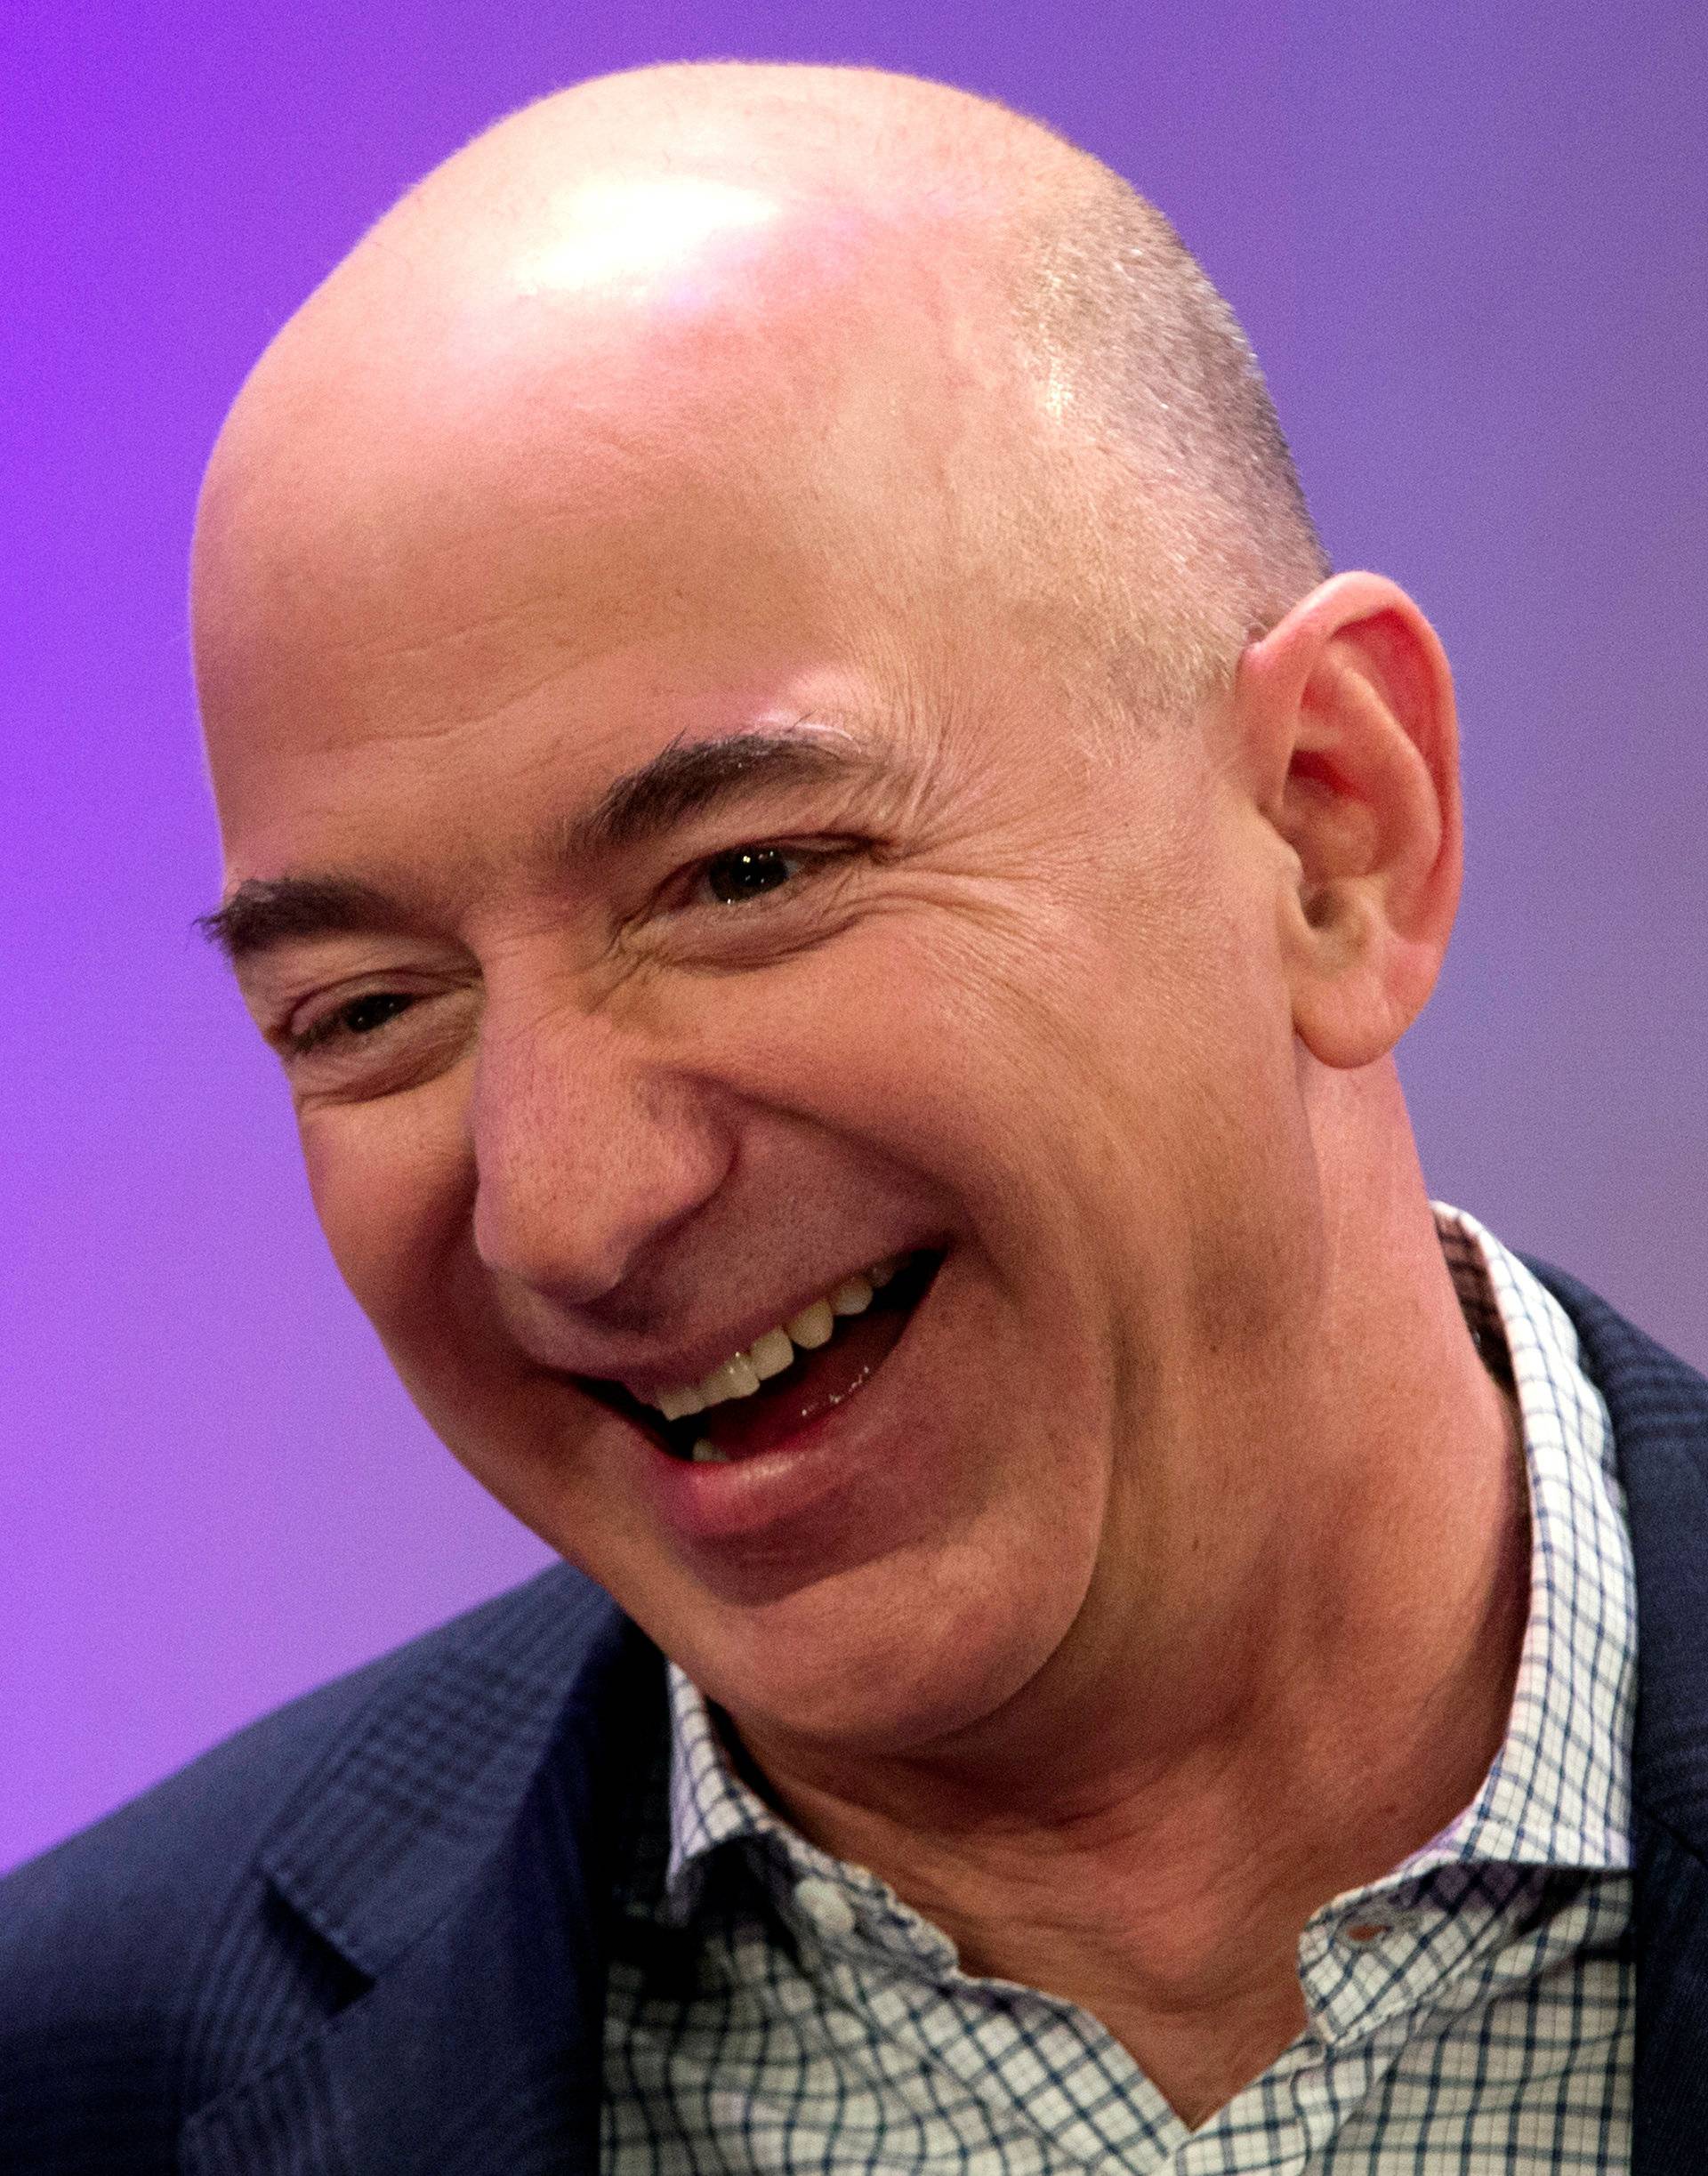 FILE PHOTO - Amazon President Chairman and CEO Bezos speaks in New York City